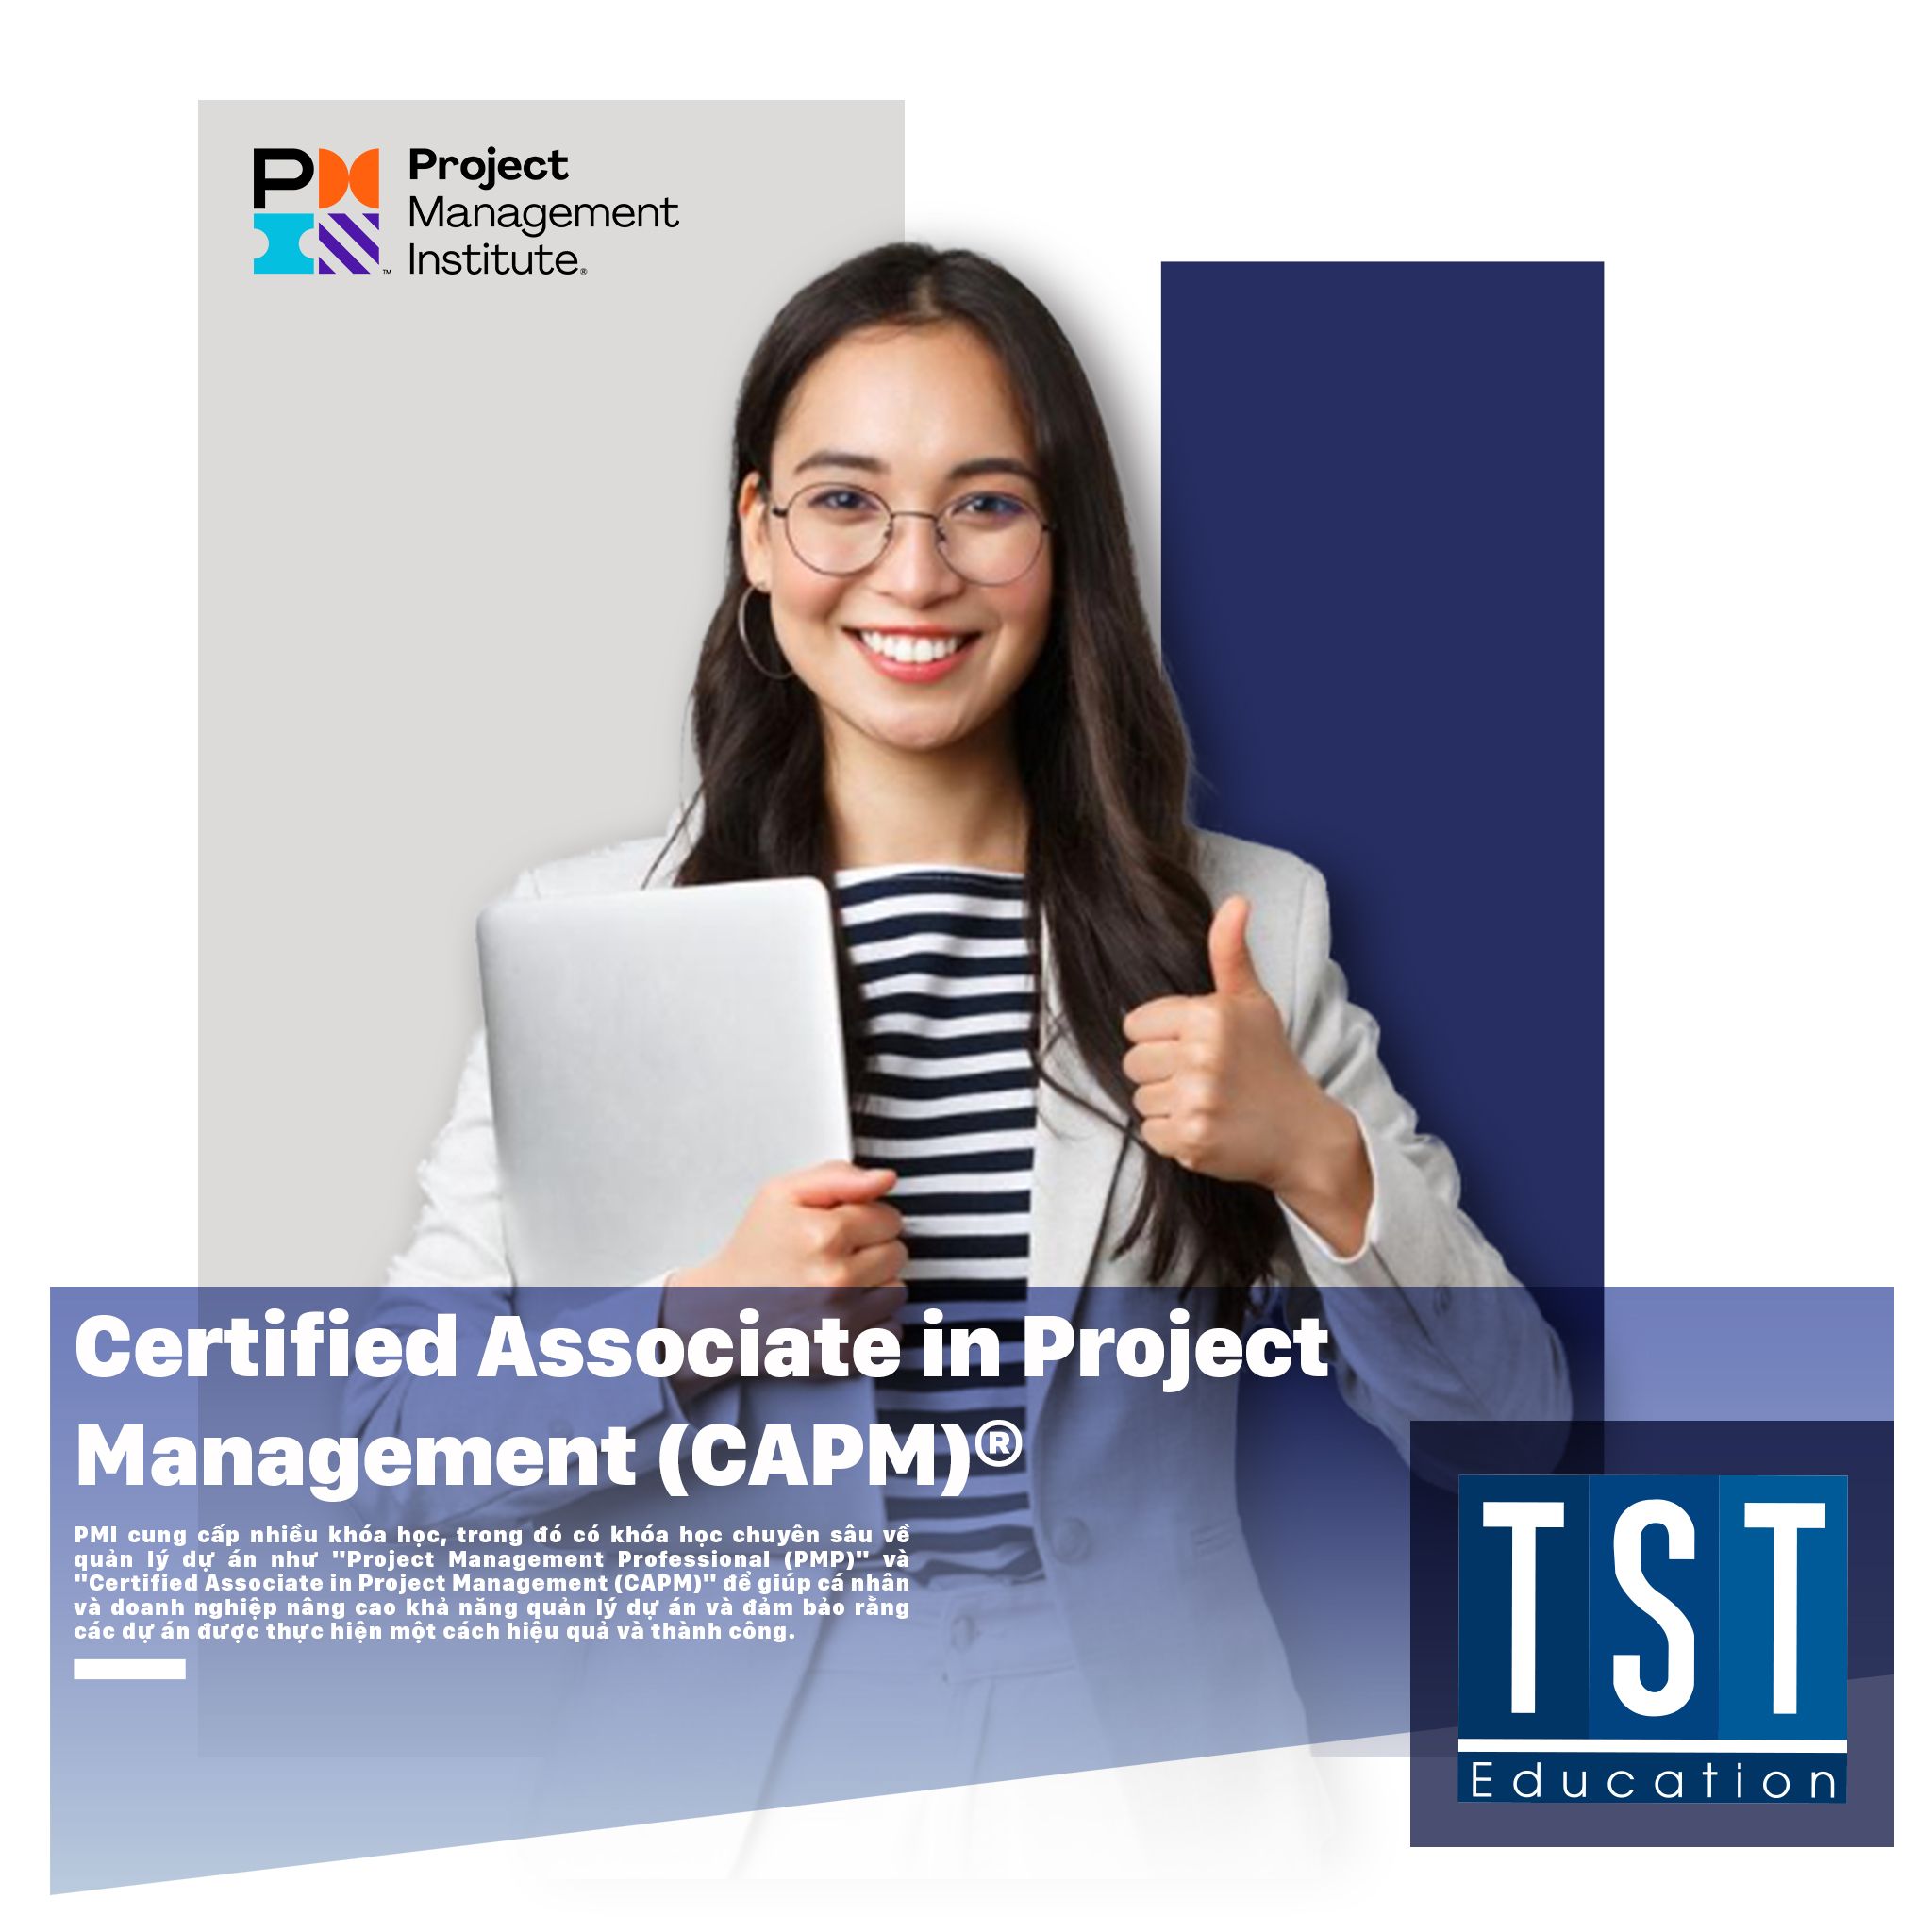  Certified Associate in Project Management (CAPM)(PMI)® 